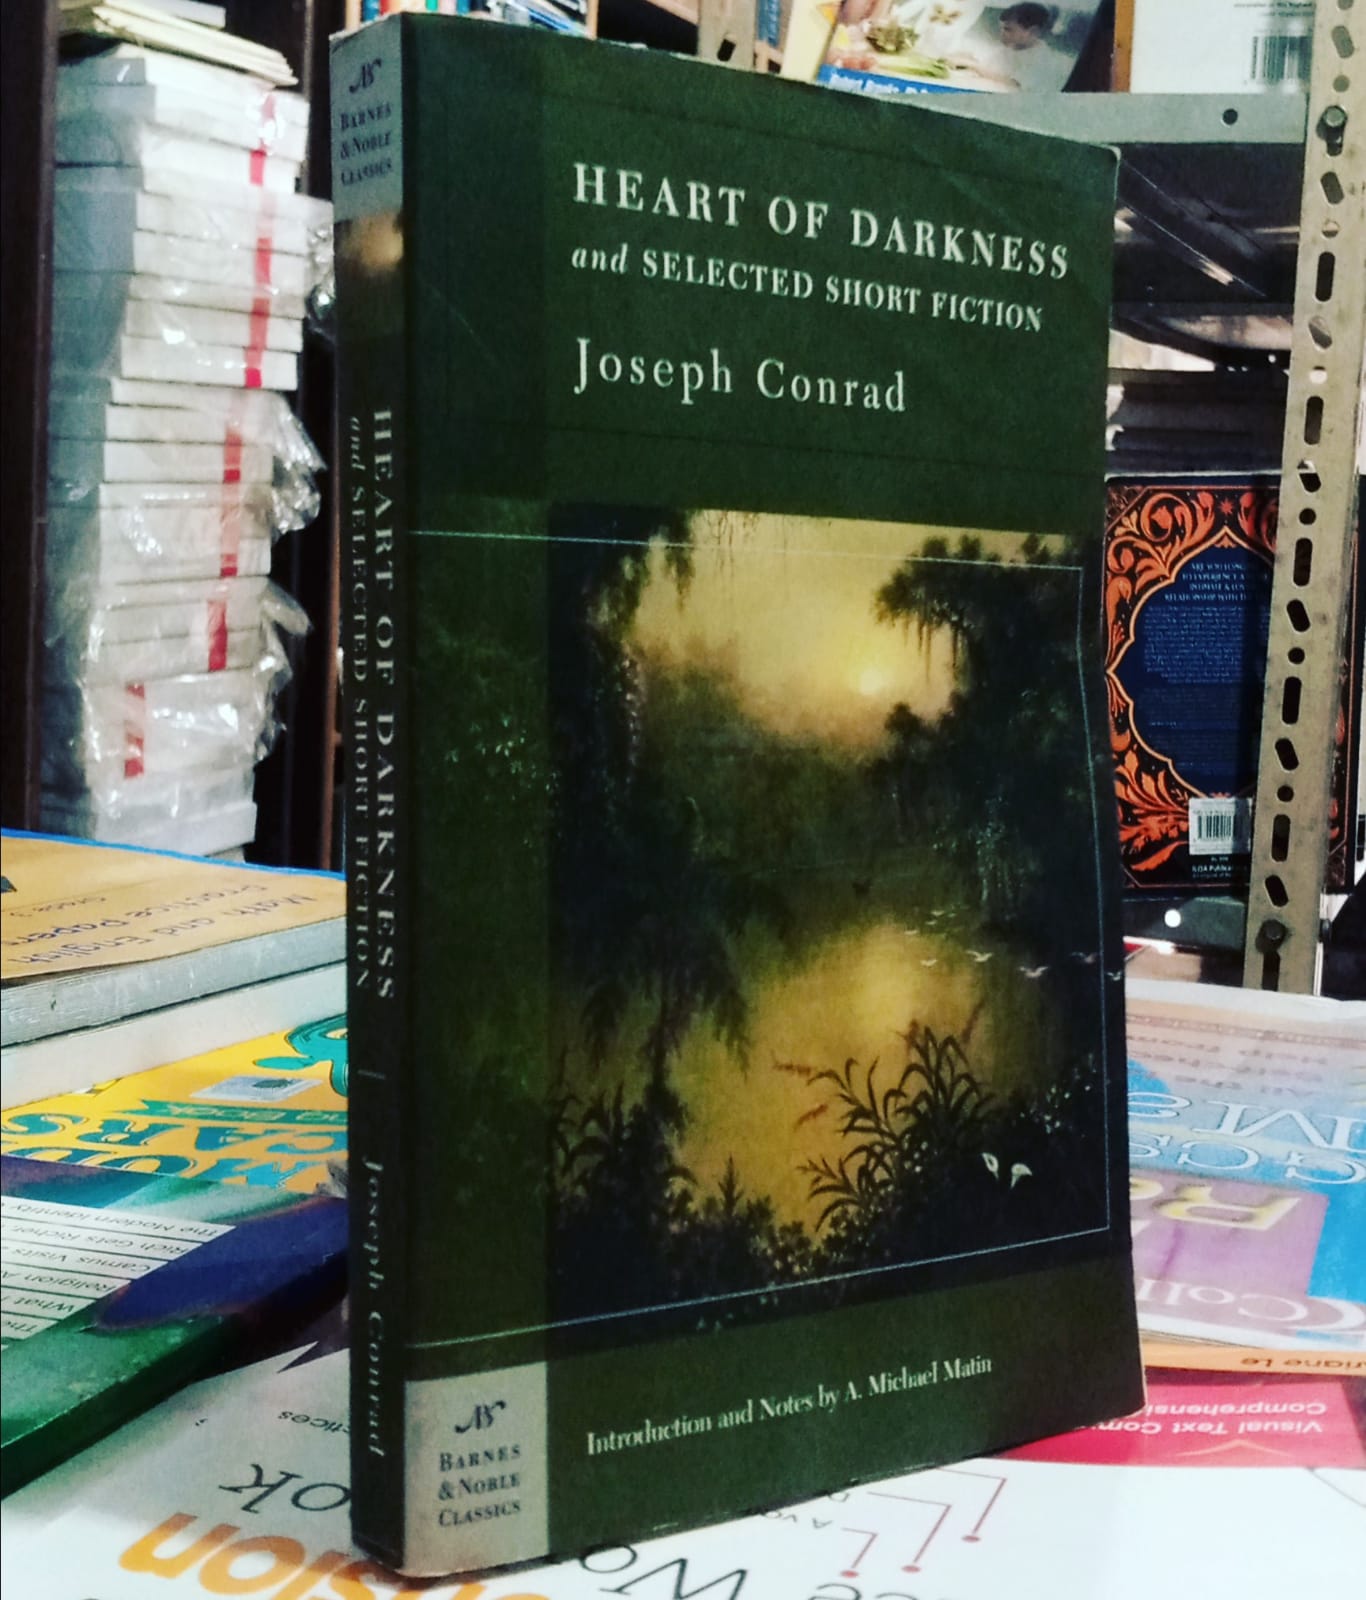 heart of darkness and selected short fiction by joseph conrad barnes & noble classics. original pape